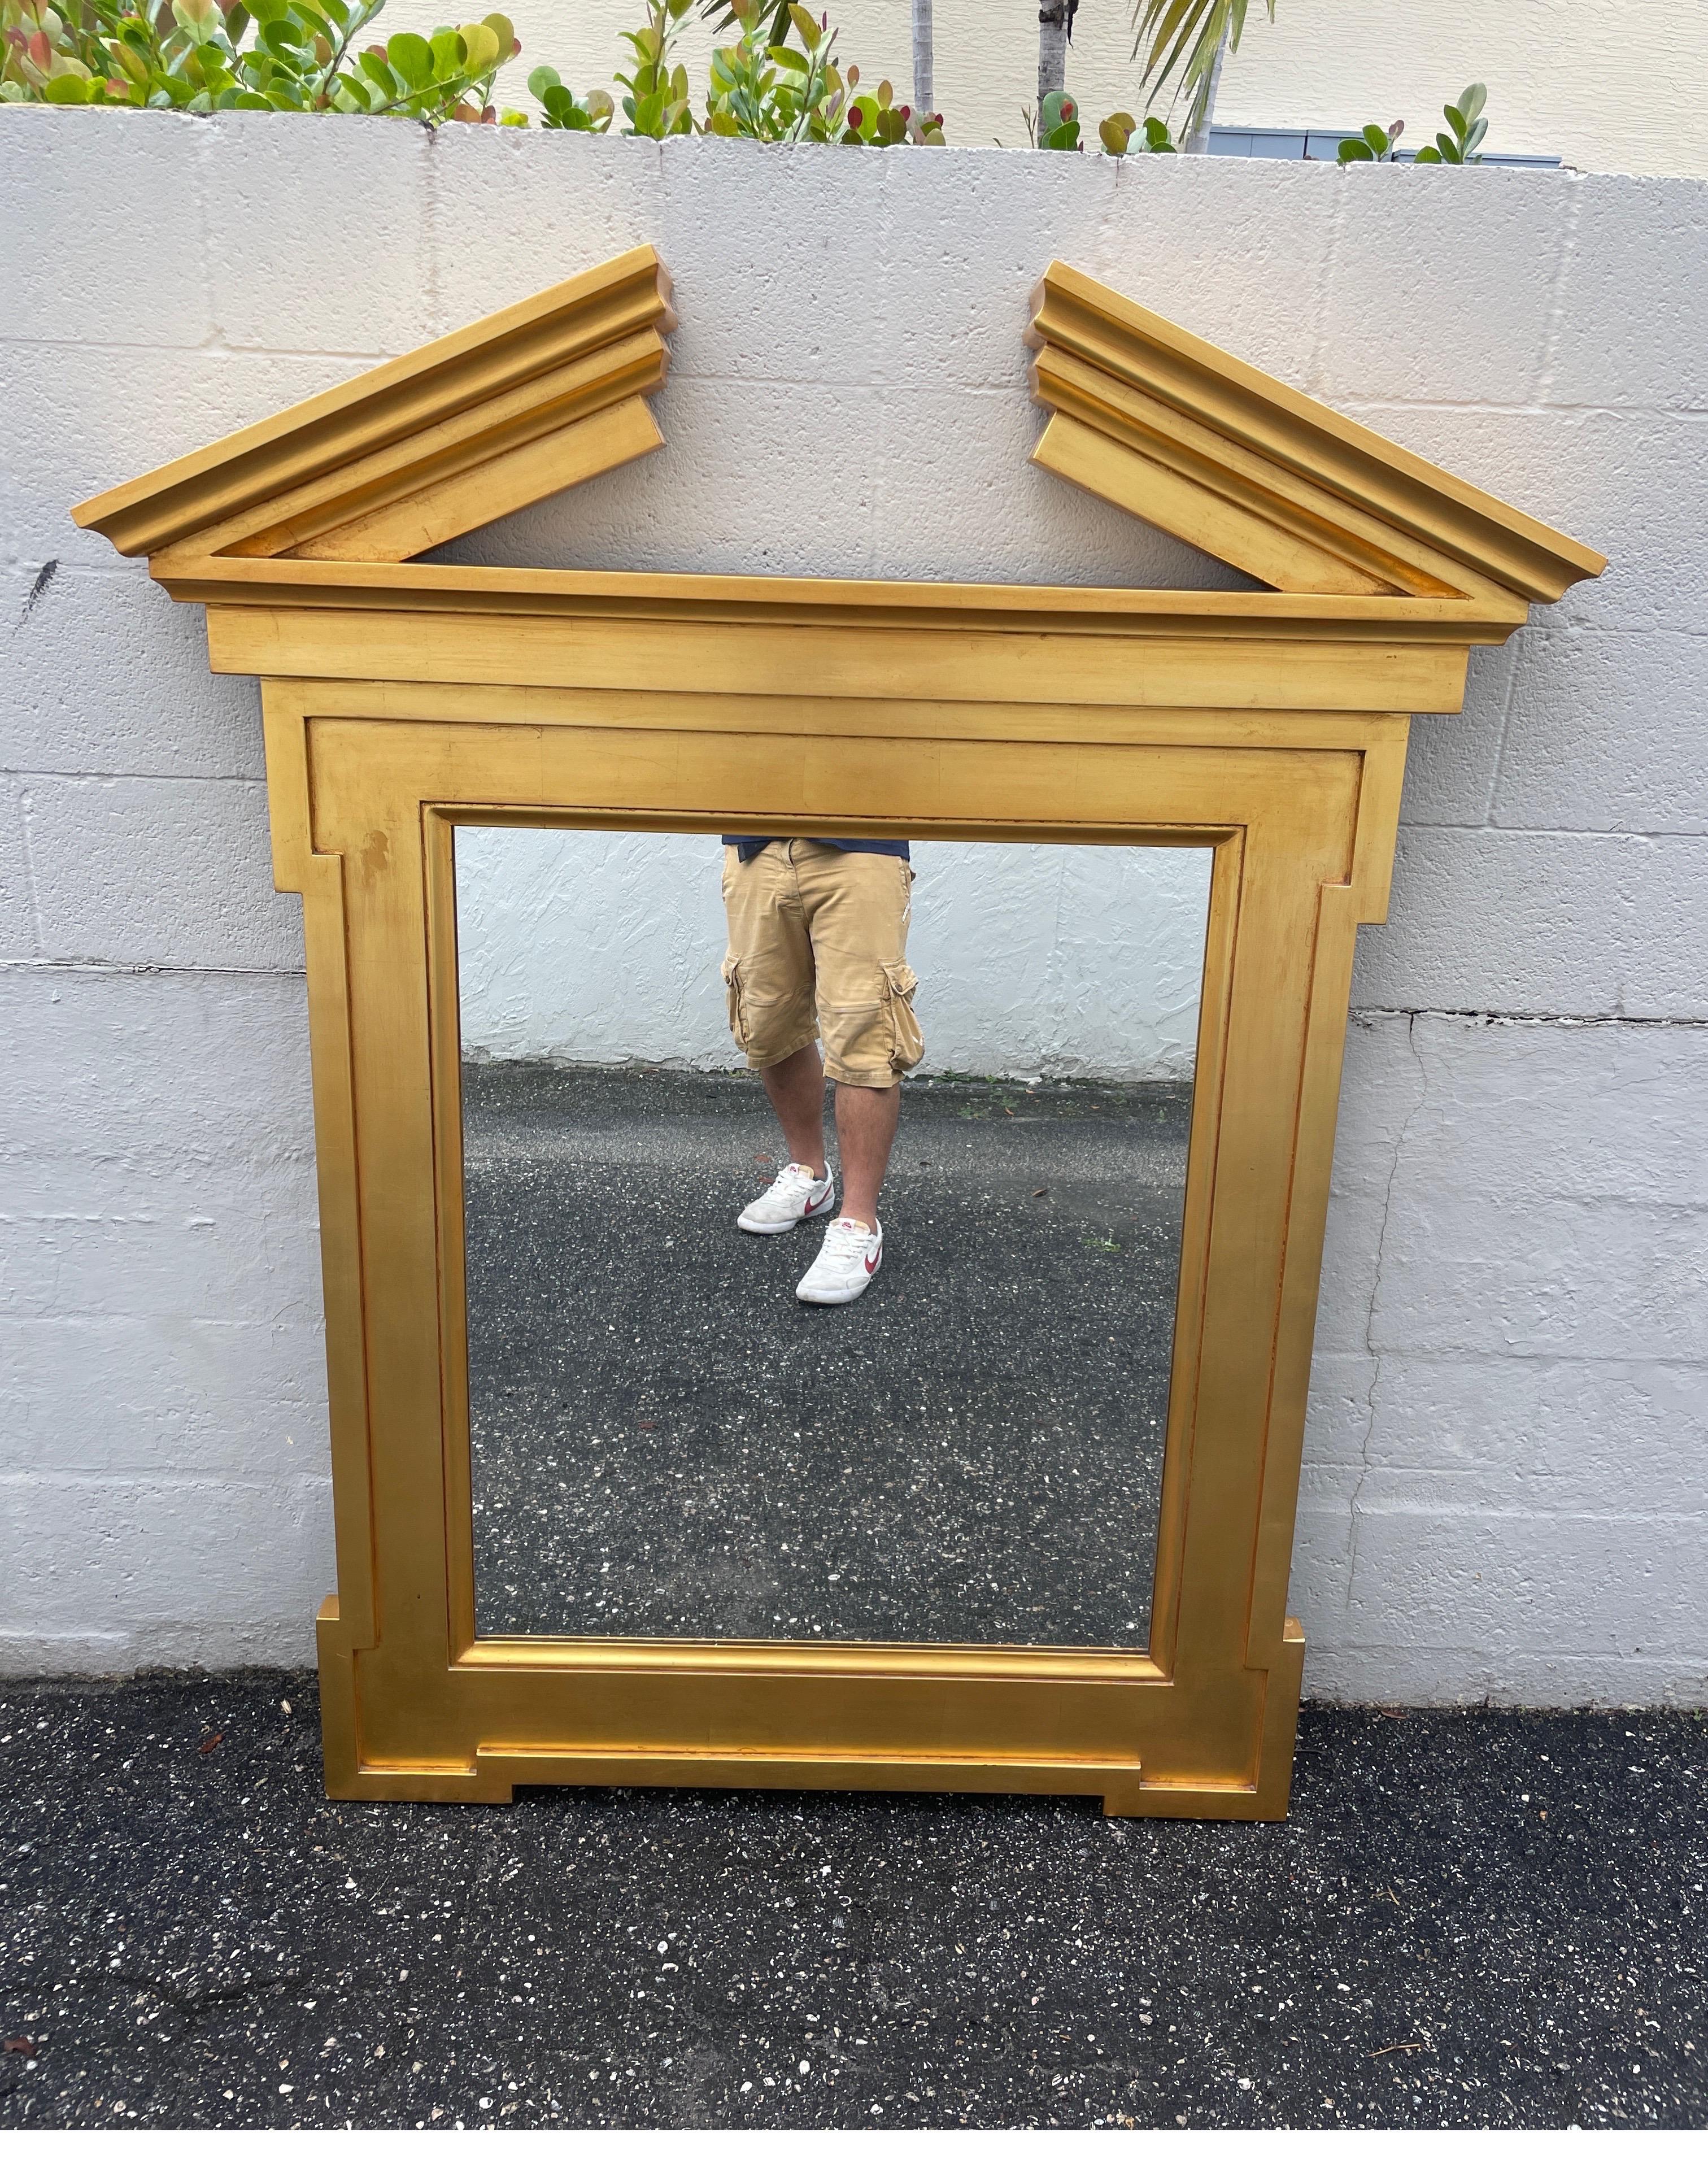 Neoclassical style giltwood broken pediment mirror by John Hutton for Donghia.
This iconic piece will add glamour to any setting.